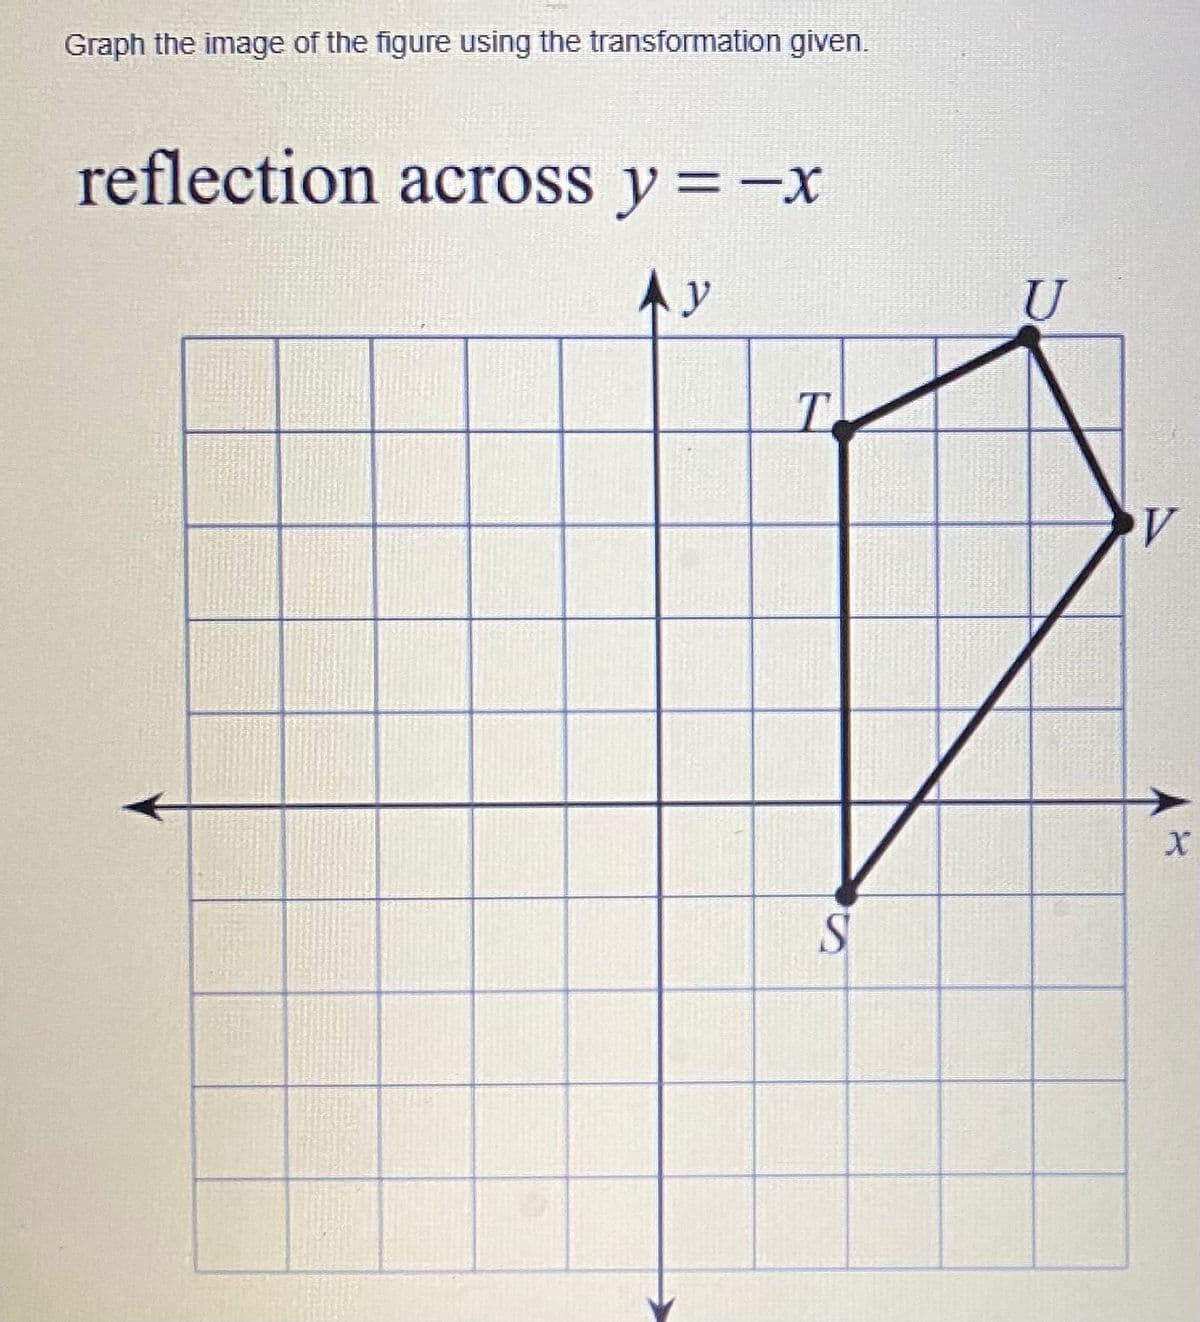 Graph the image of the figure using the transformation given.
reflection across y =-x
Ay
T.
V
